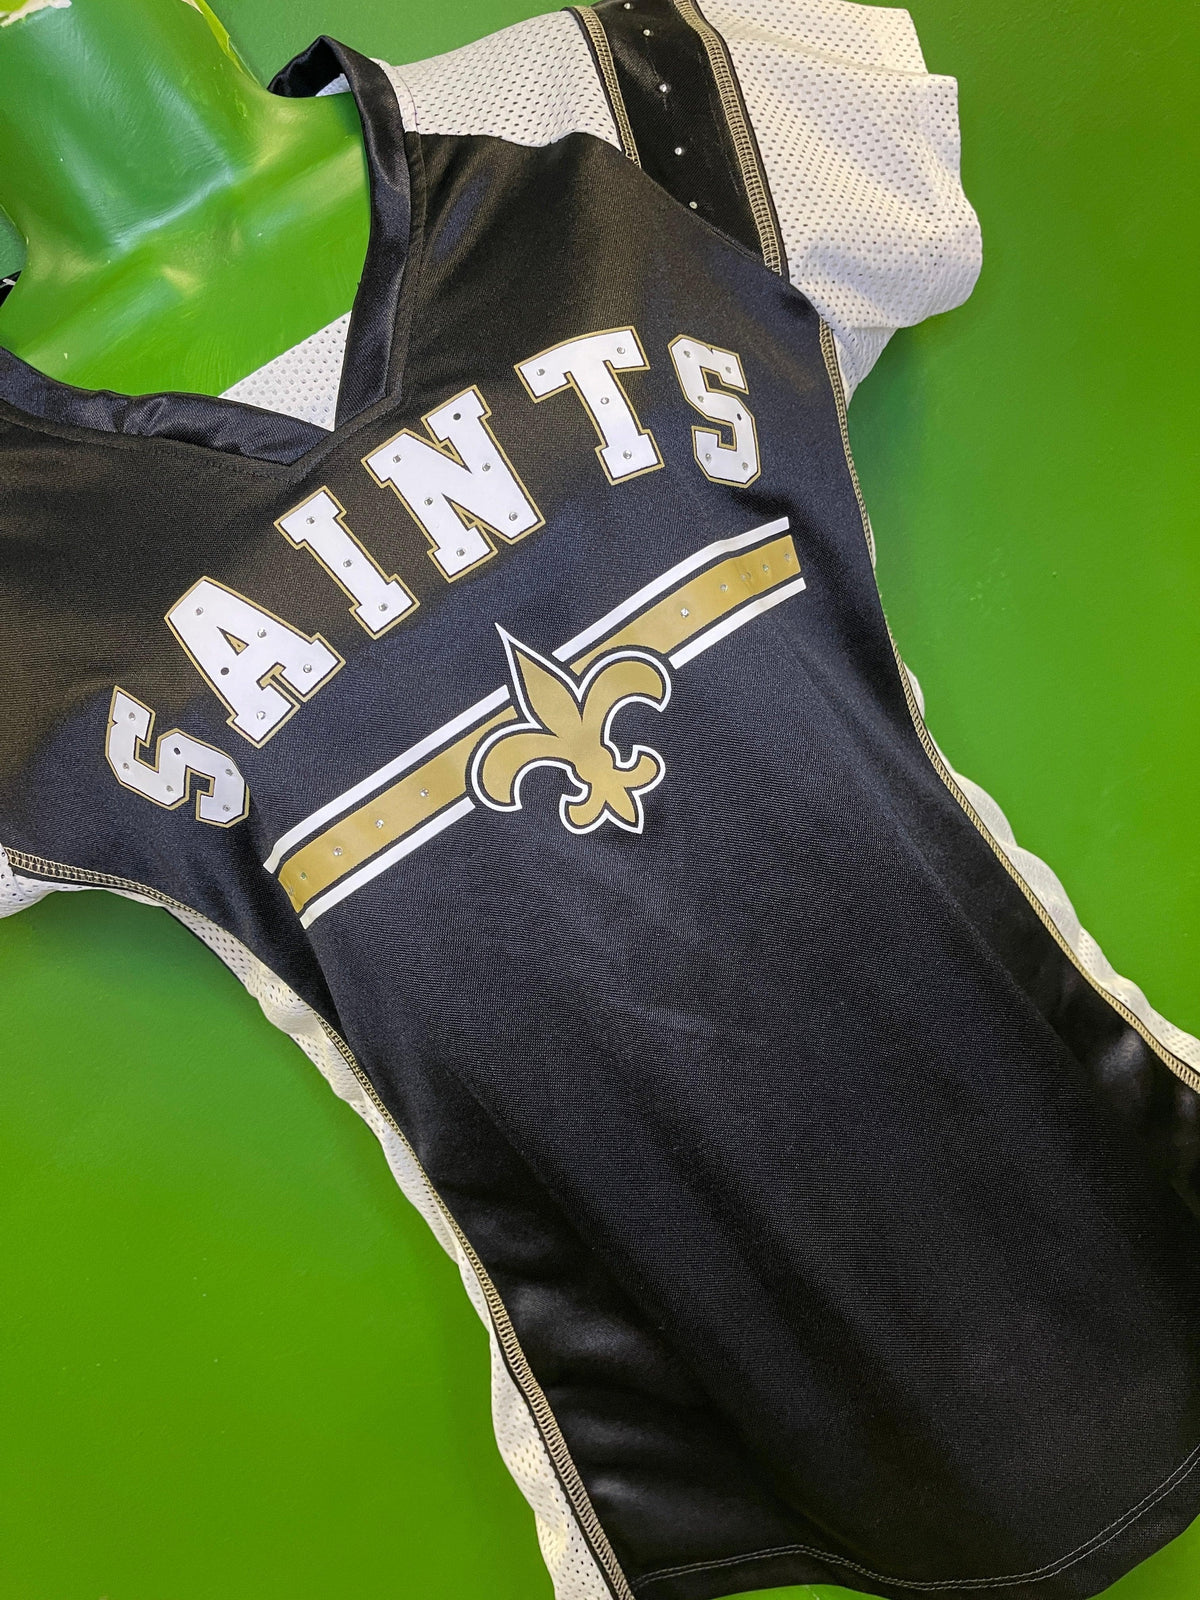 NFL New Orleans Saints Sparkly Mesh Jersey Women's Small